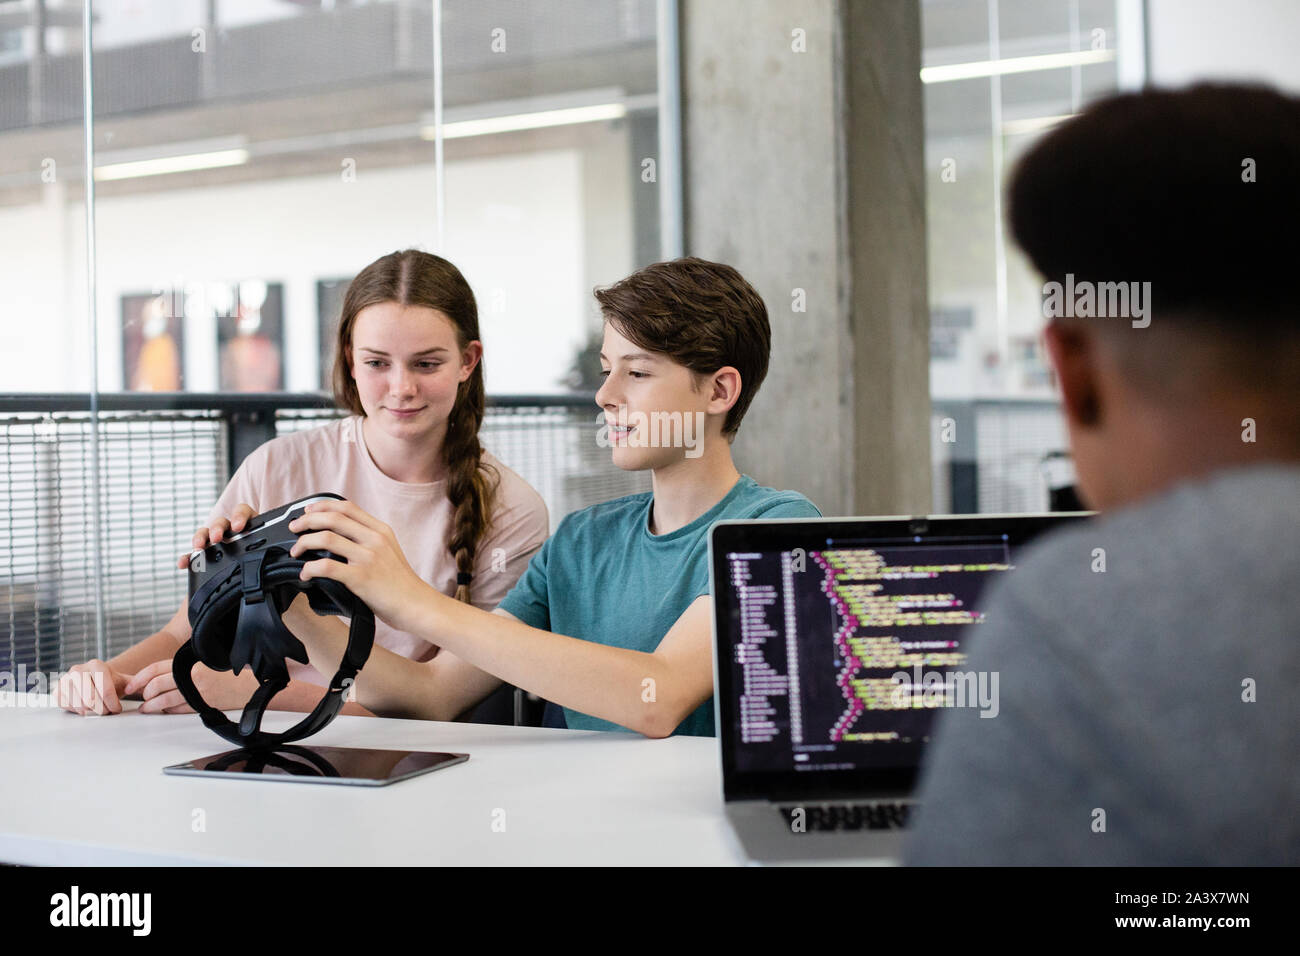 High school students using VR headset in class Stock Photo